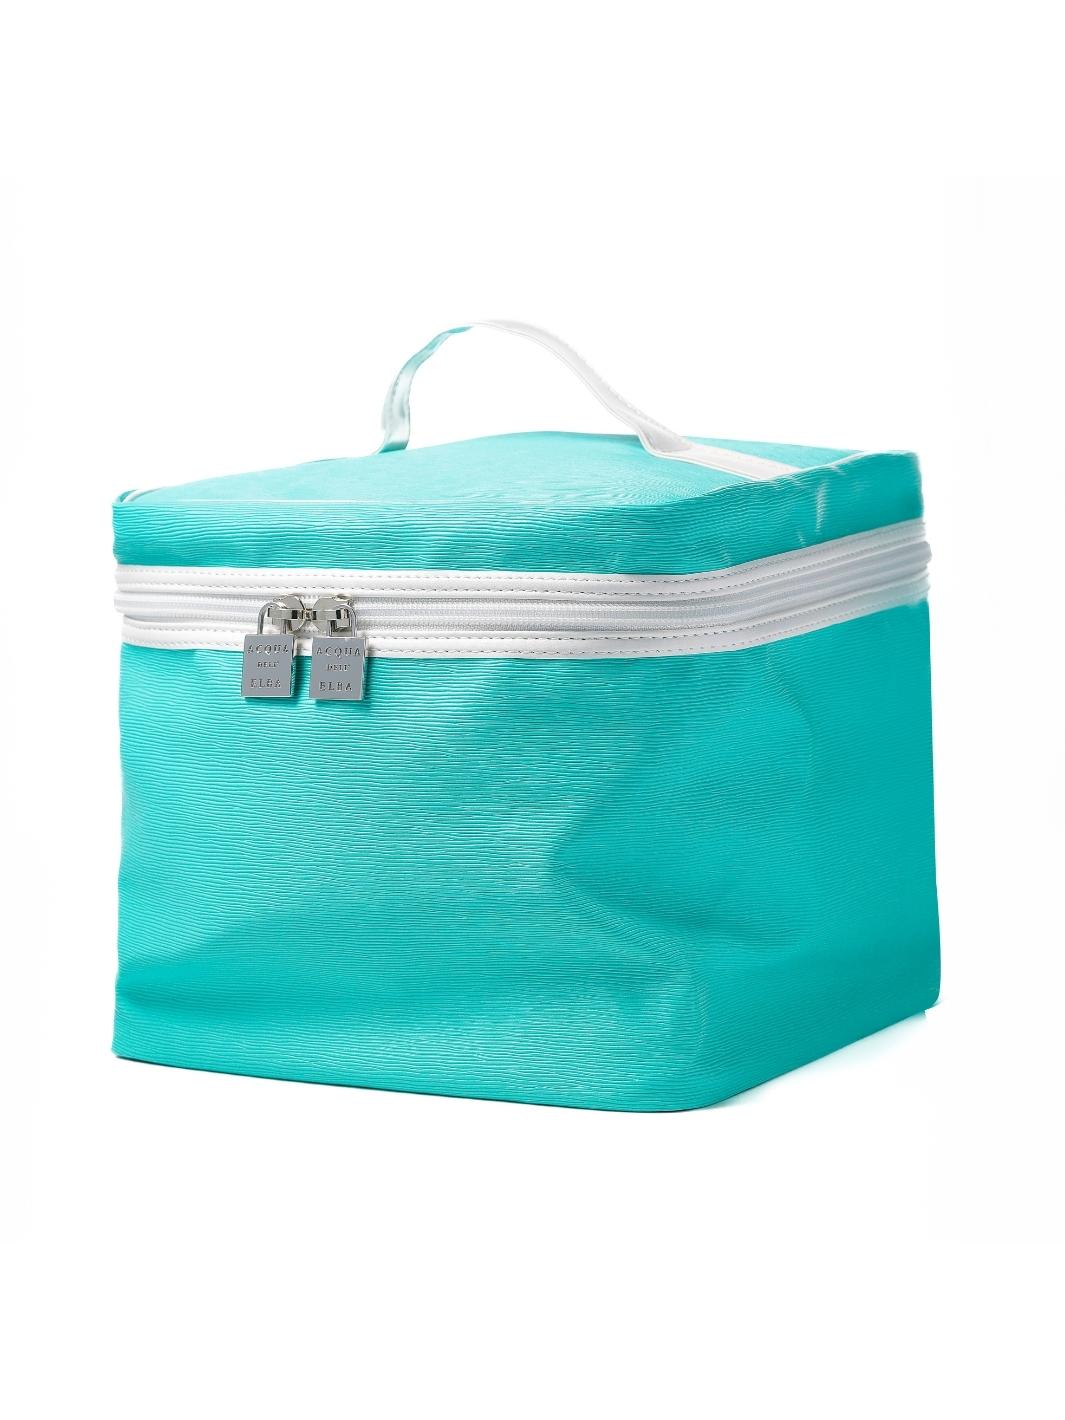 Beauty Travel Cube Tote